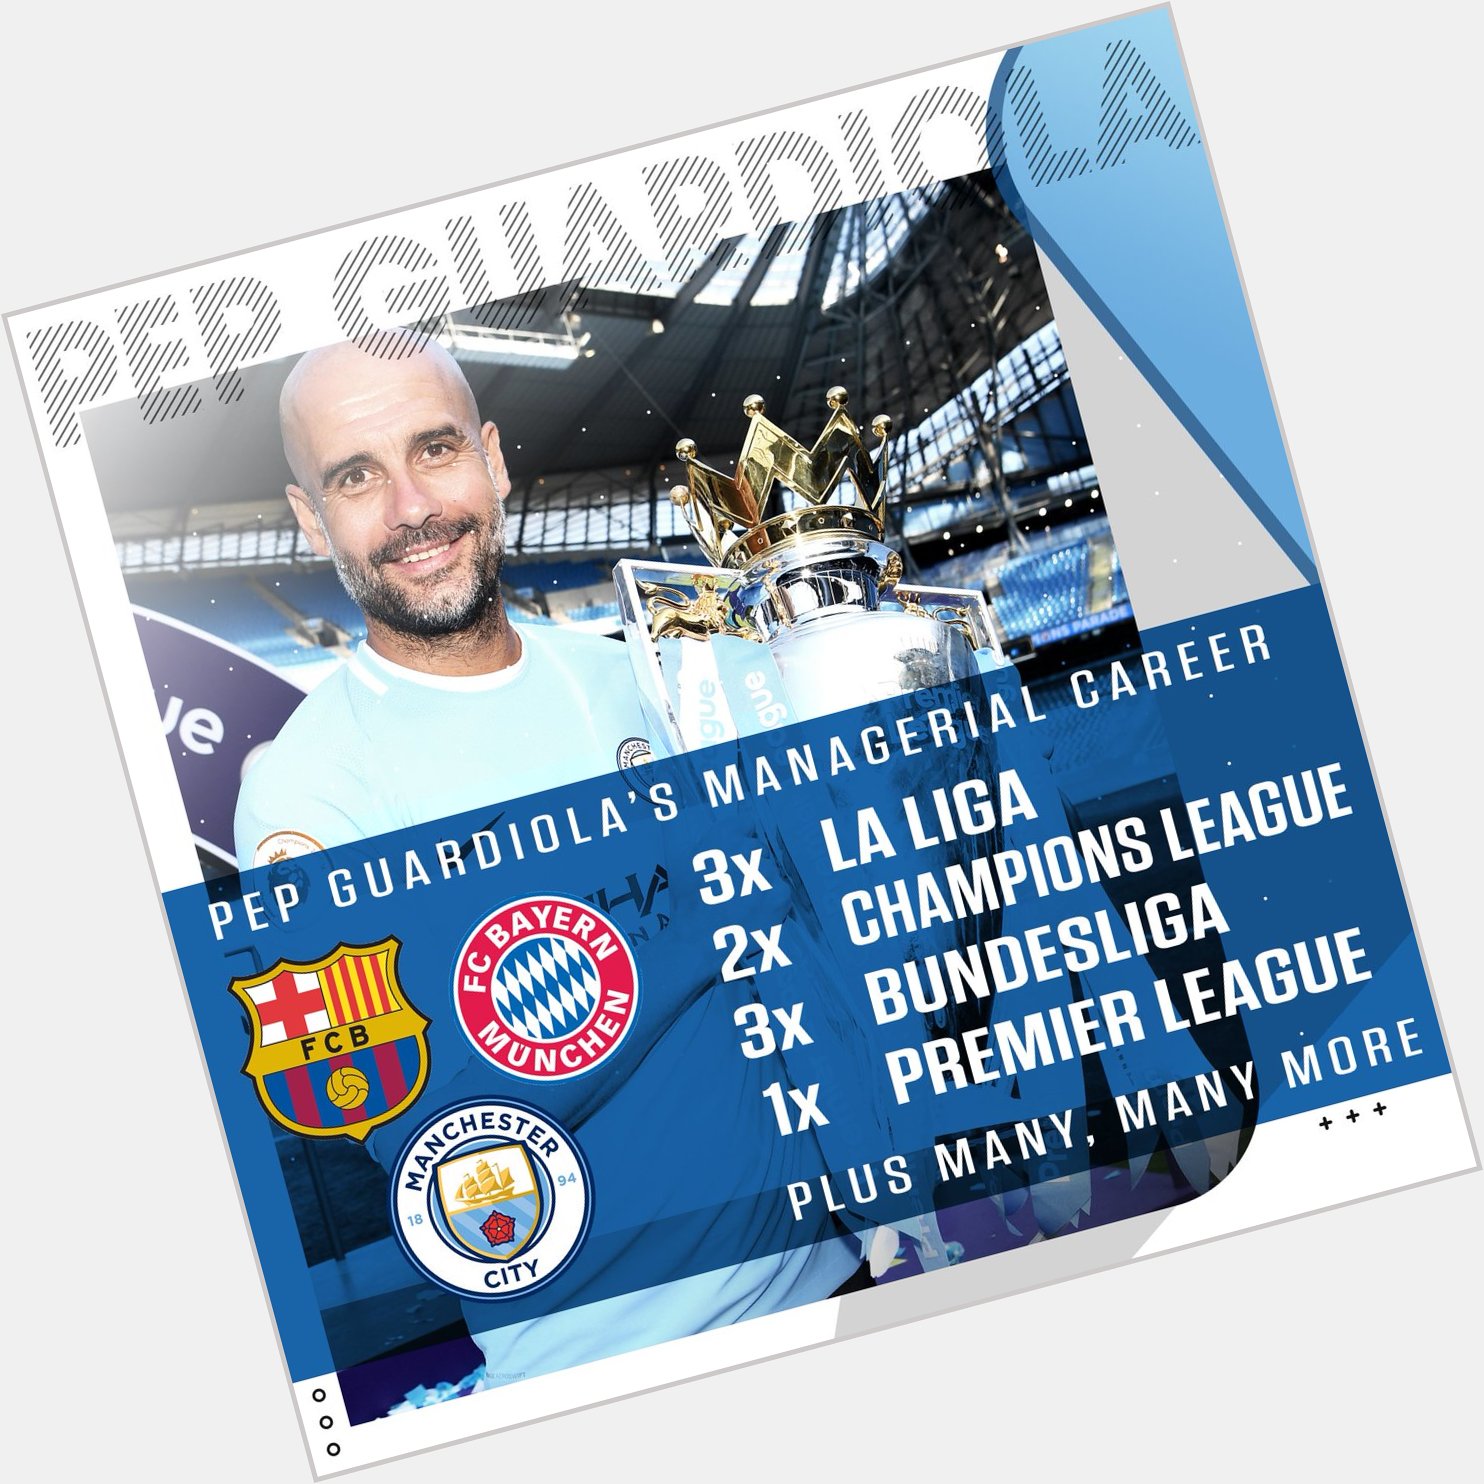 Happy birthday to Pep Guardiola! A champion everywhere he goes 